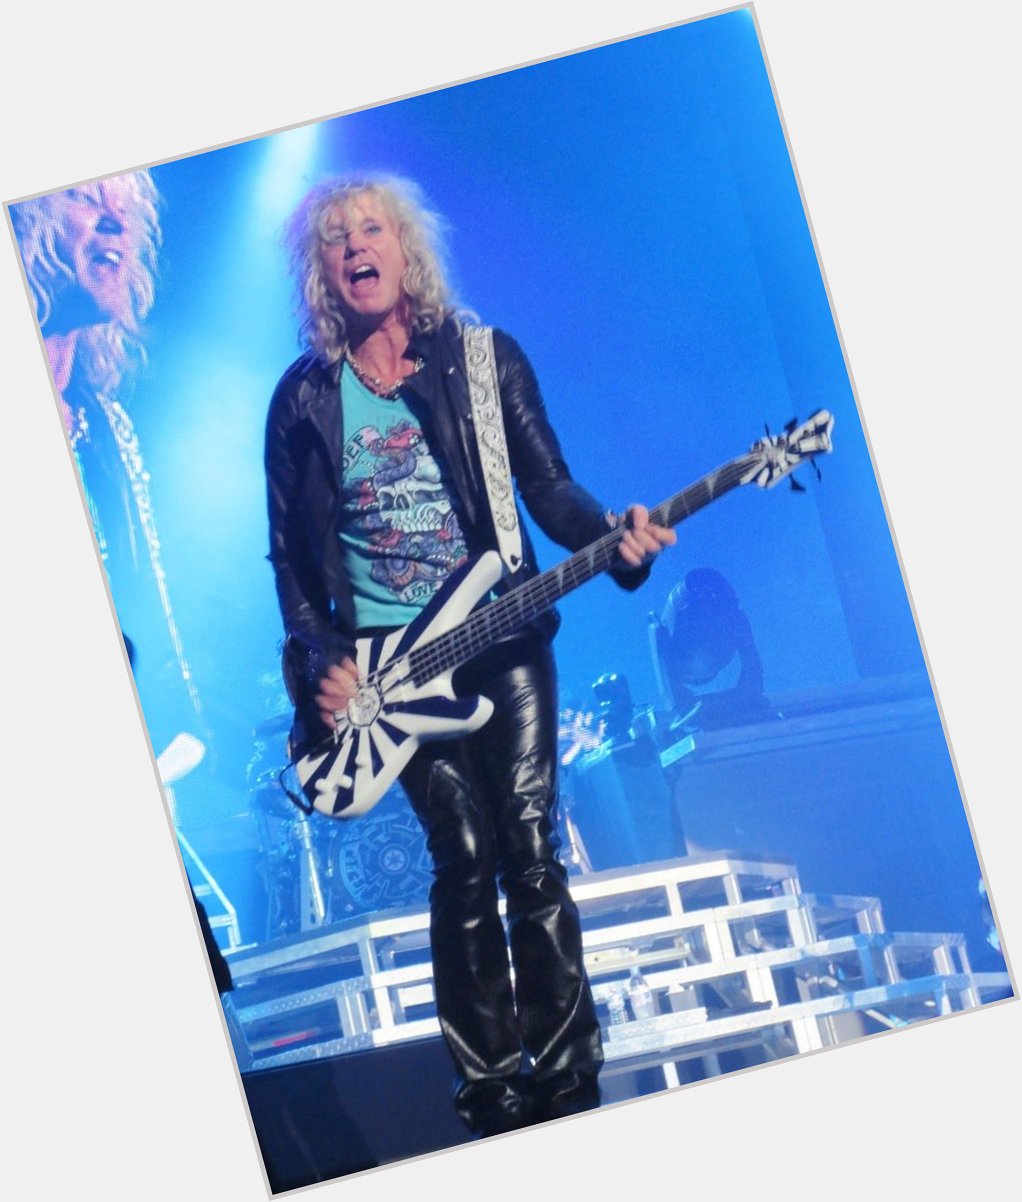 Happy 55th Birthday to Rick Savage of - & owner of a rather spendid bass guitar. 